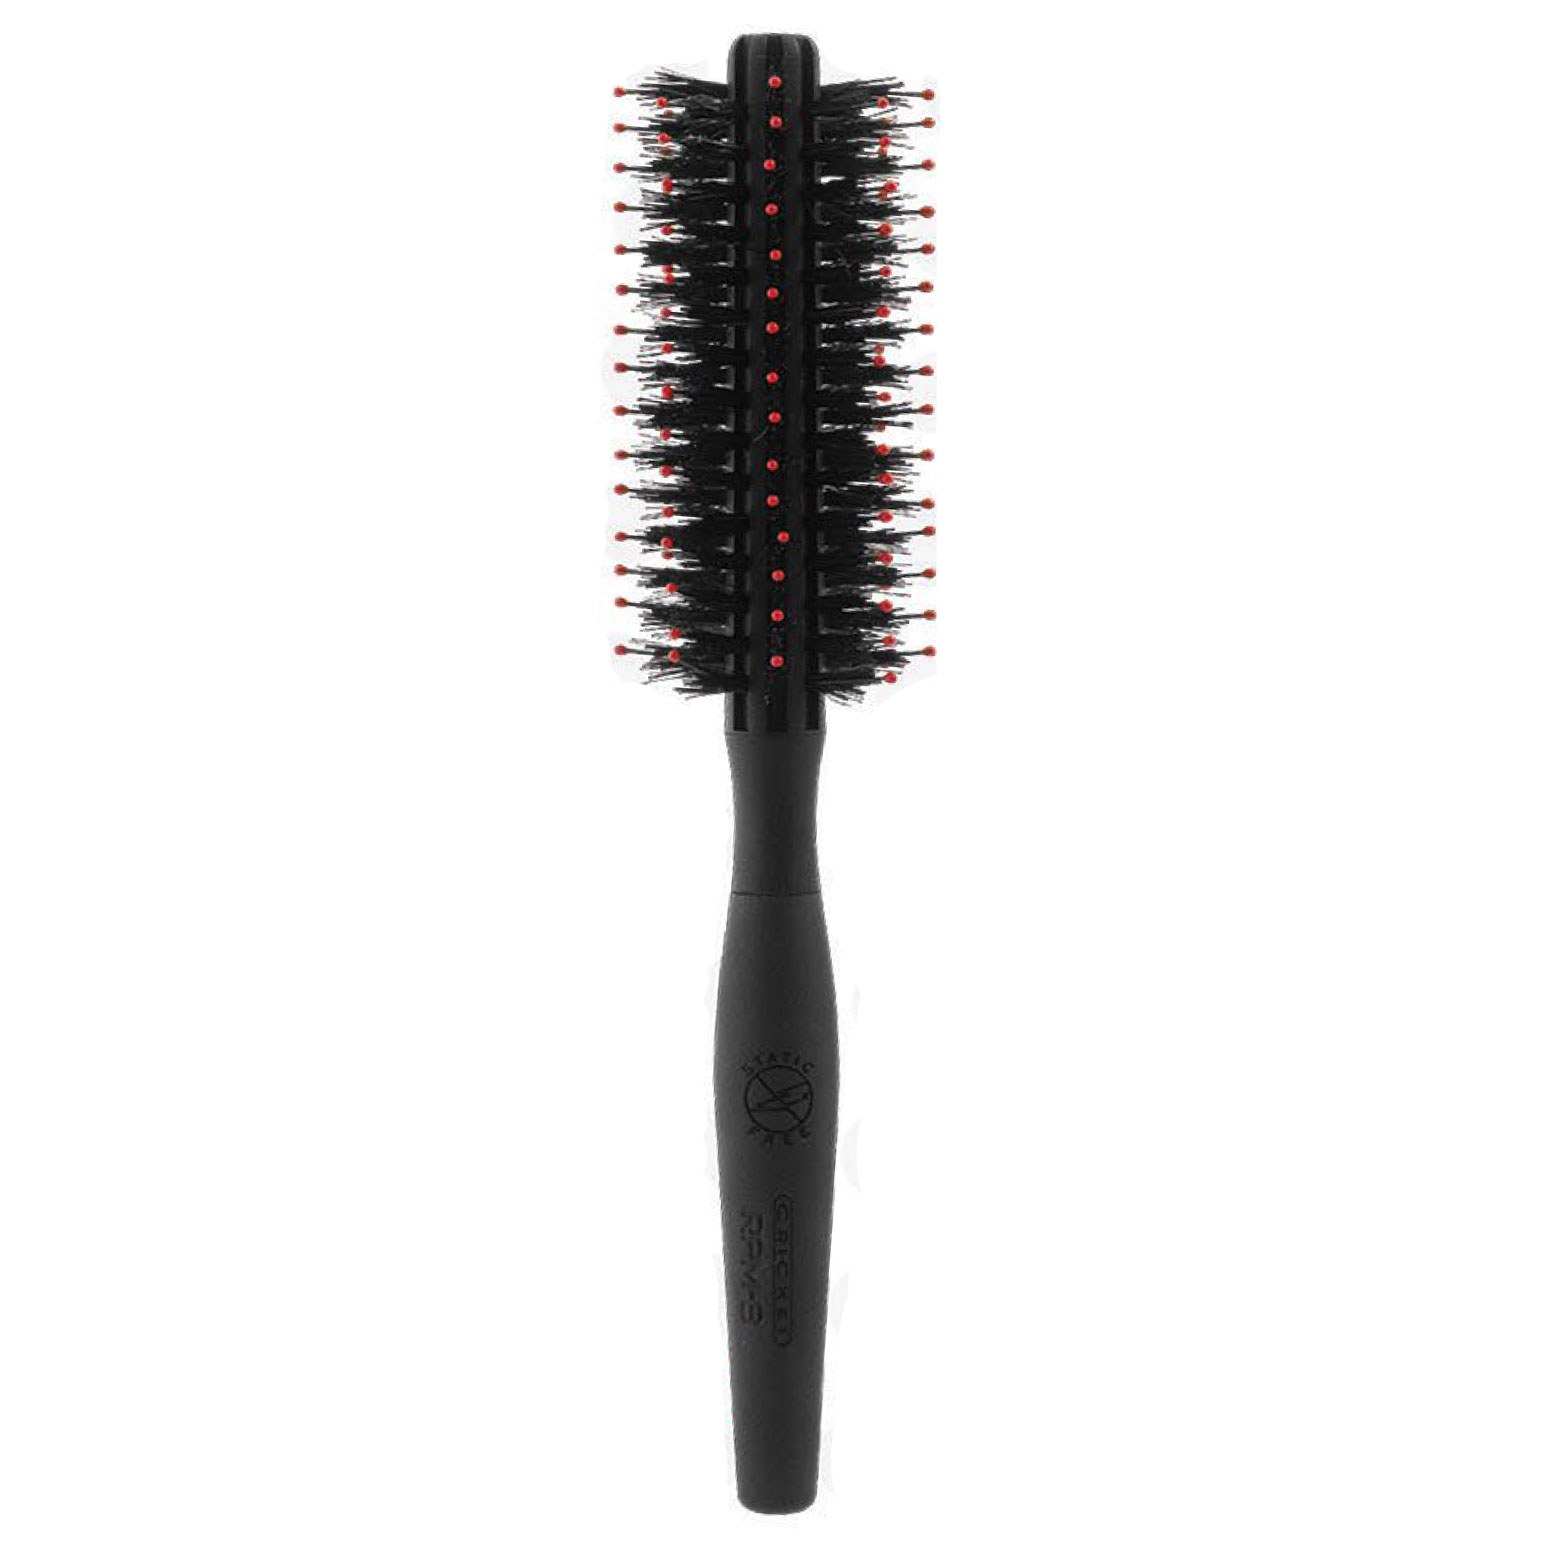 Cricket BRUSHES: Static Free RFM-8 Deluxe Boar Brush